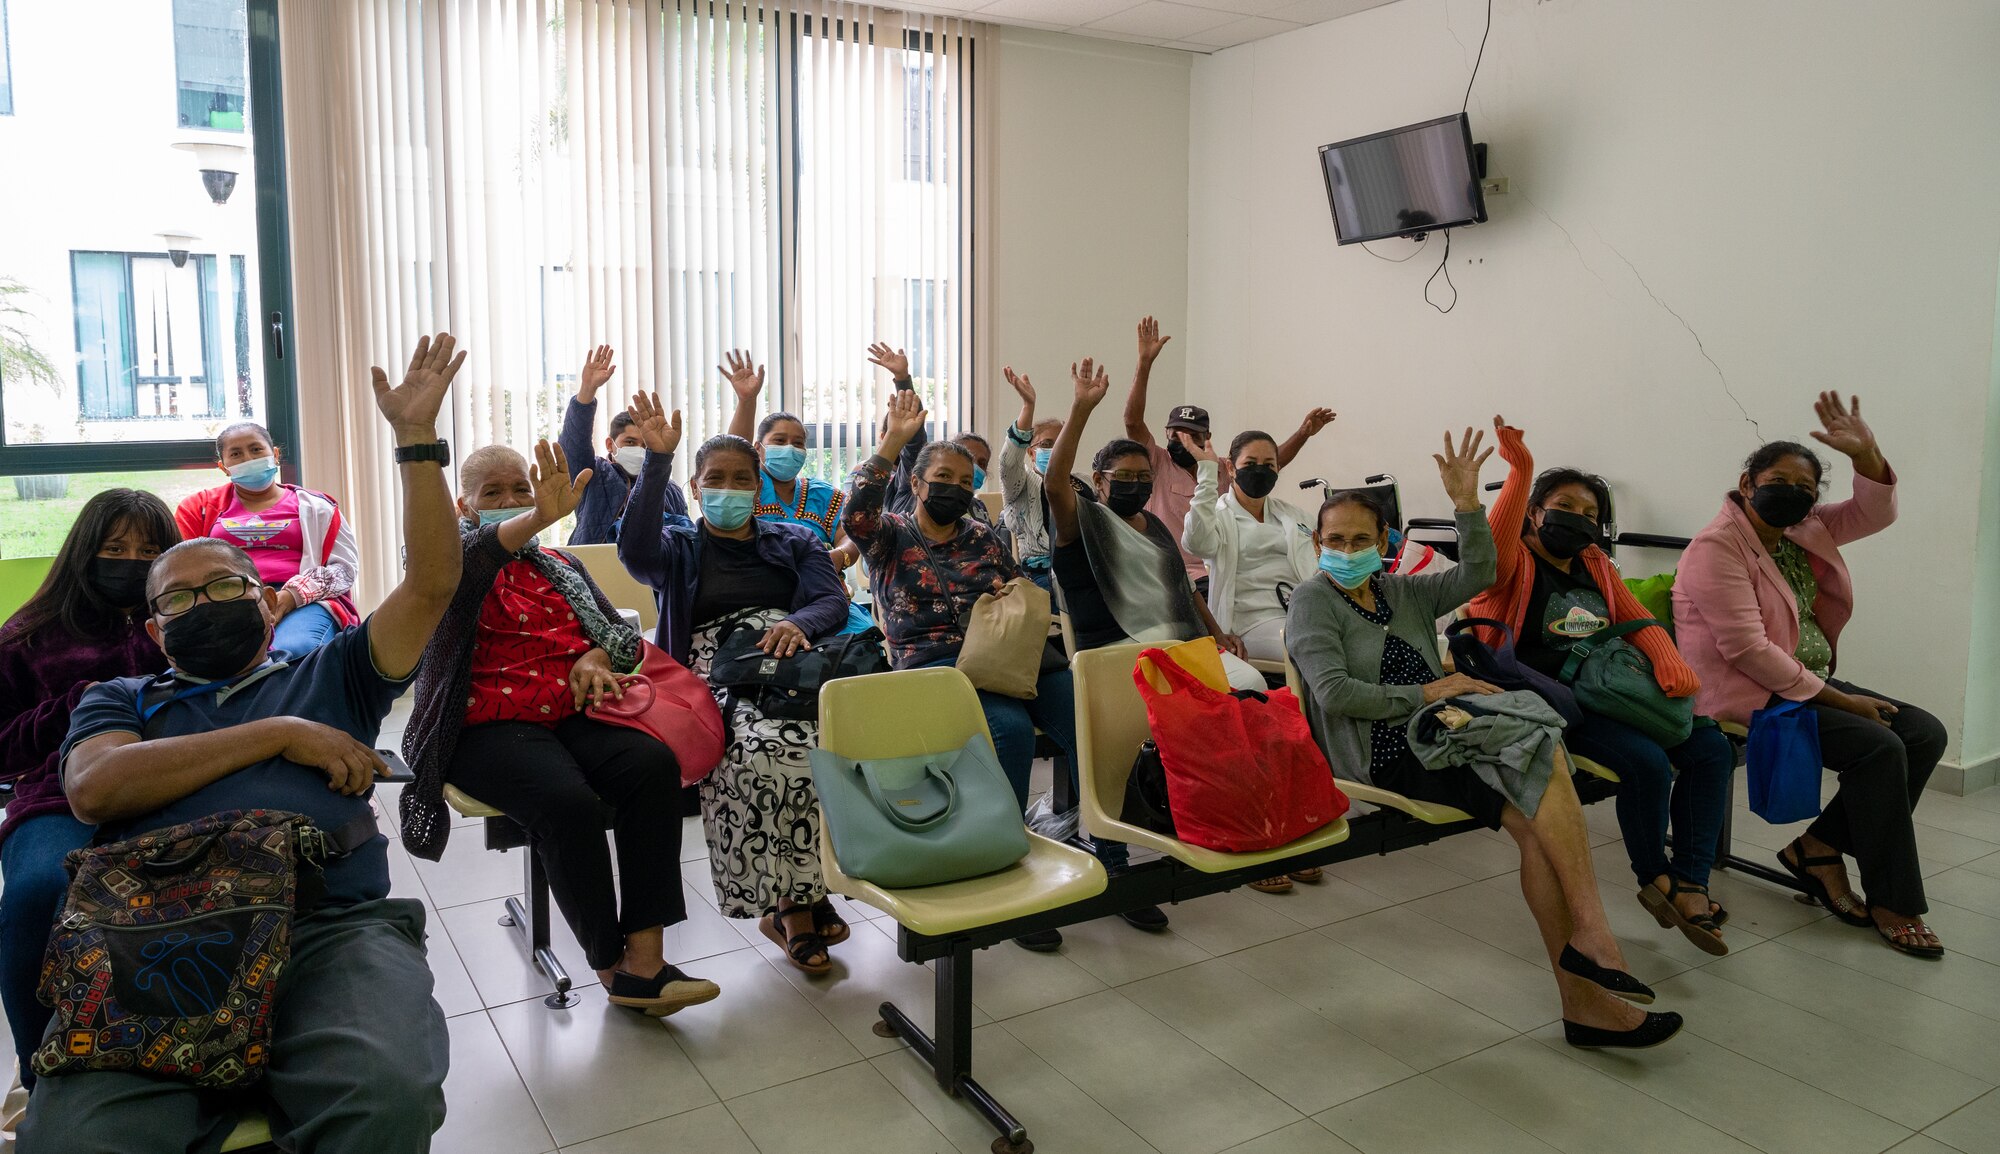 Family members in a waiting room wave to the camera.